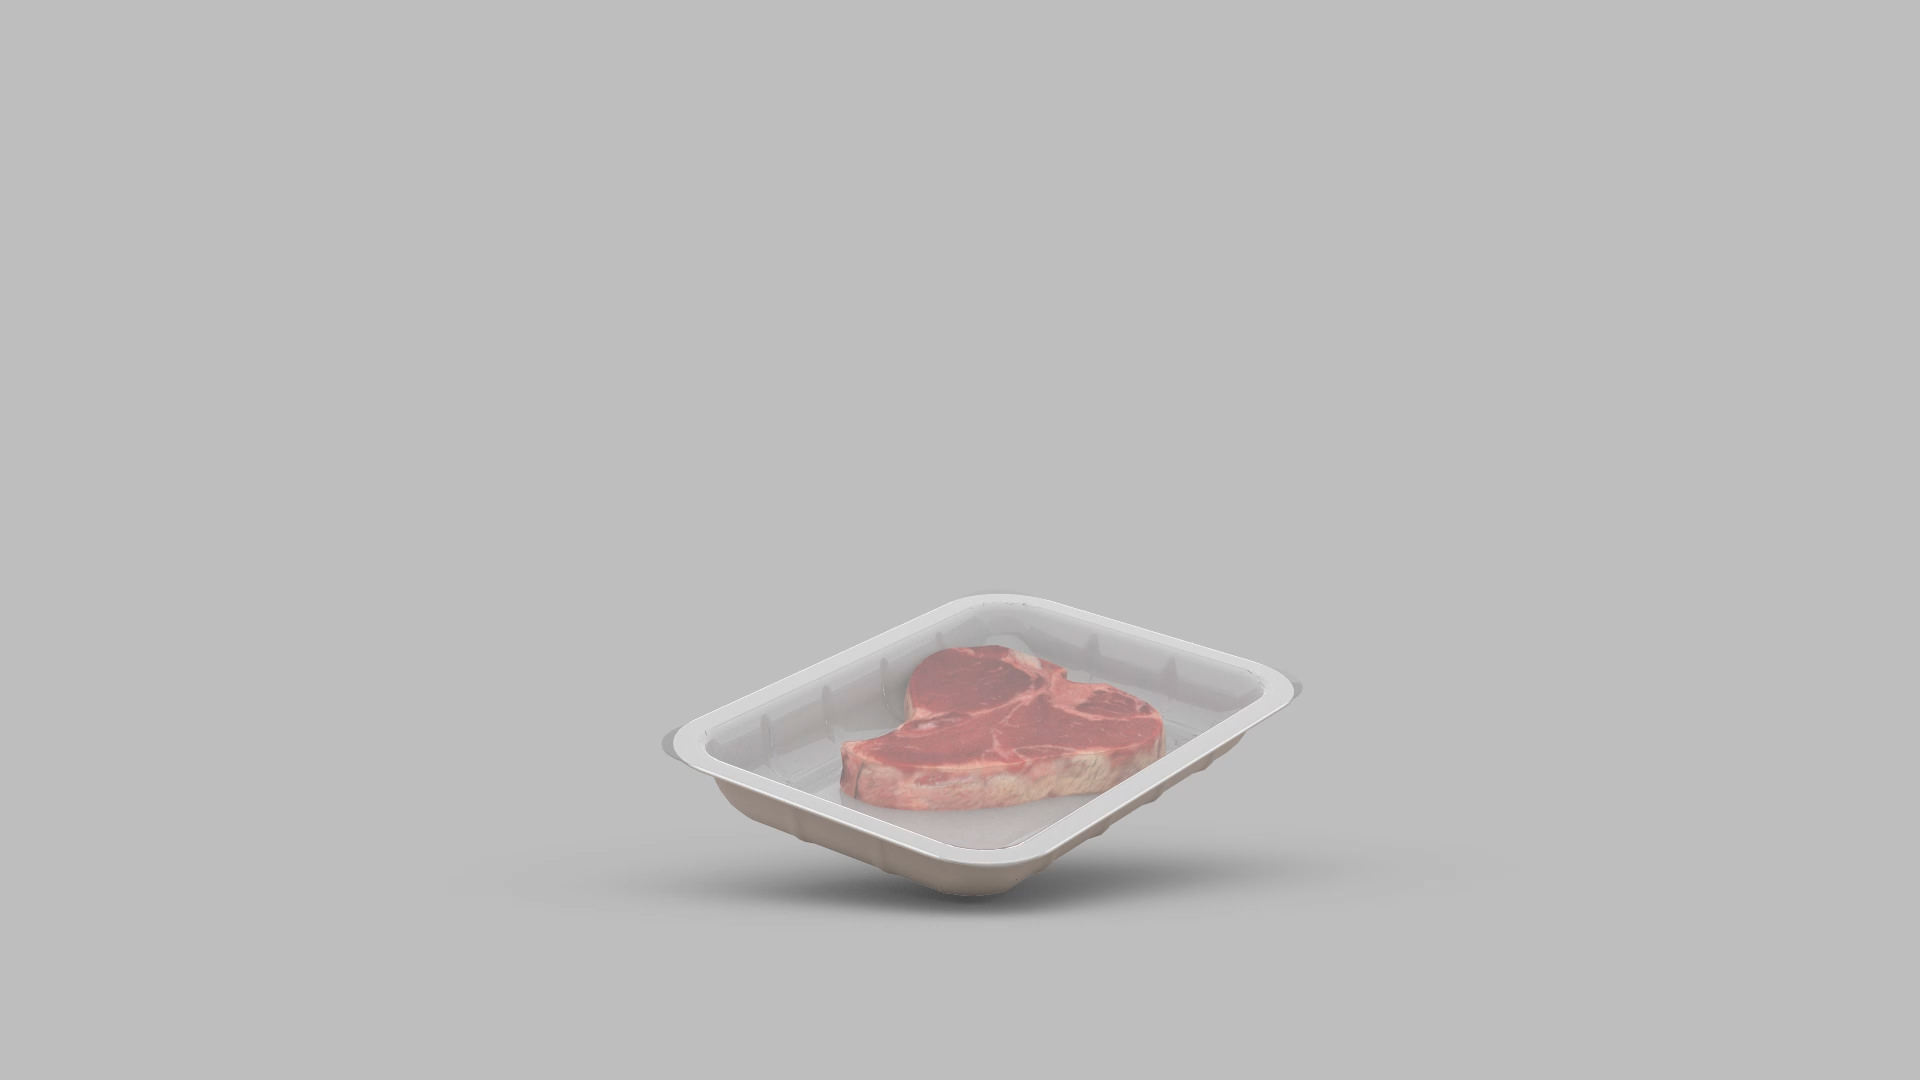 Steak in disposable paper tray